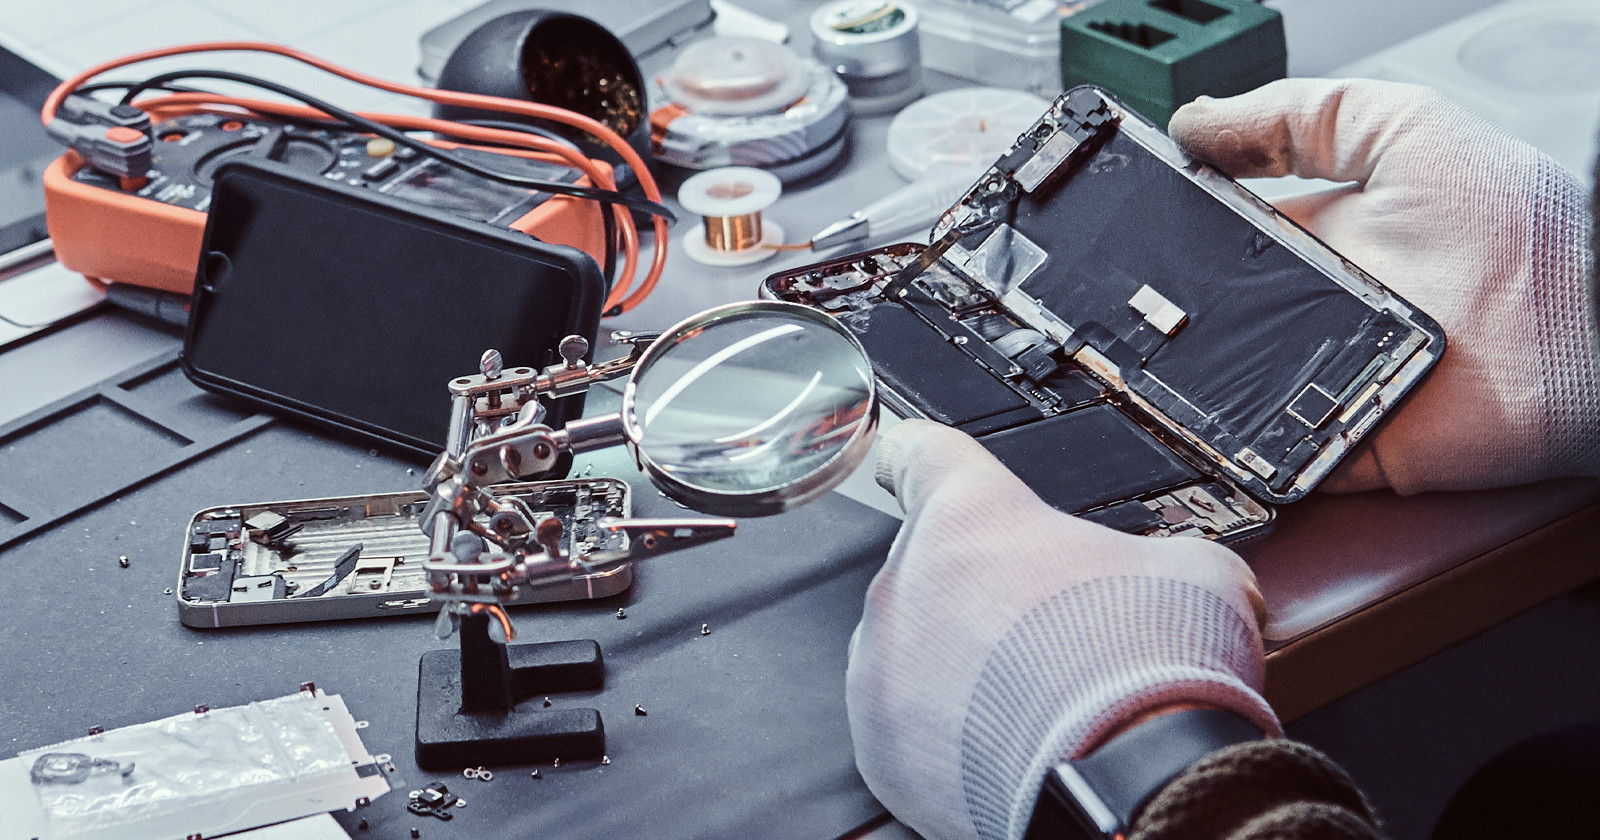 New York State Passes Landmark Electronics ‘Right to Repair’ Law